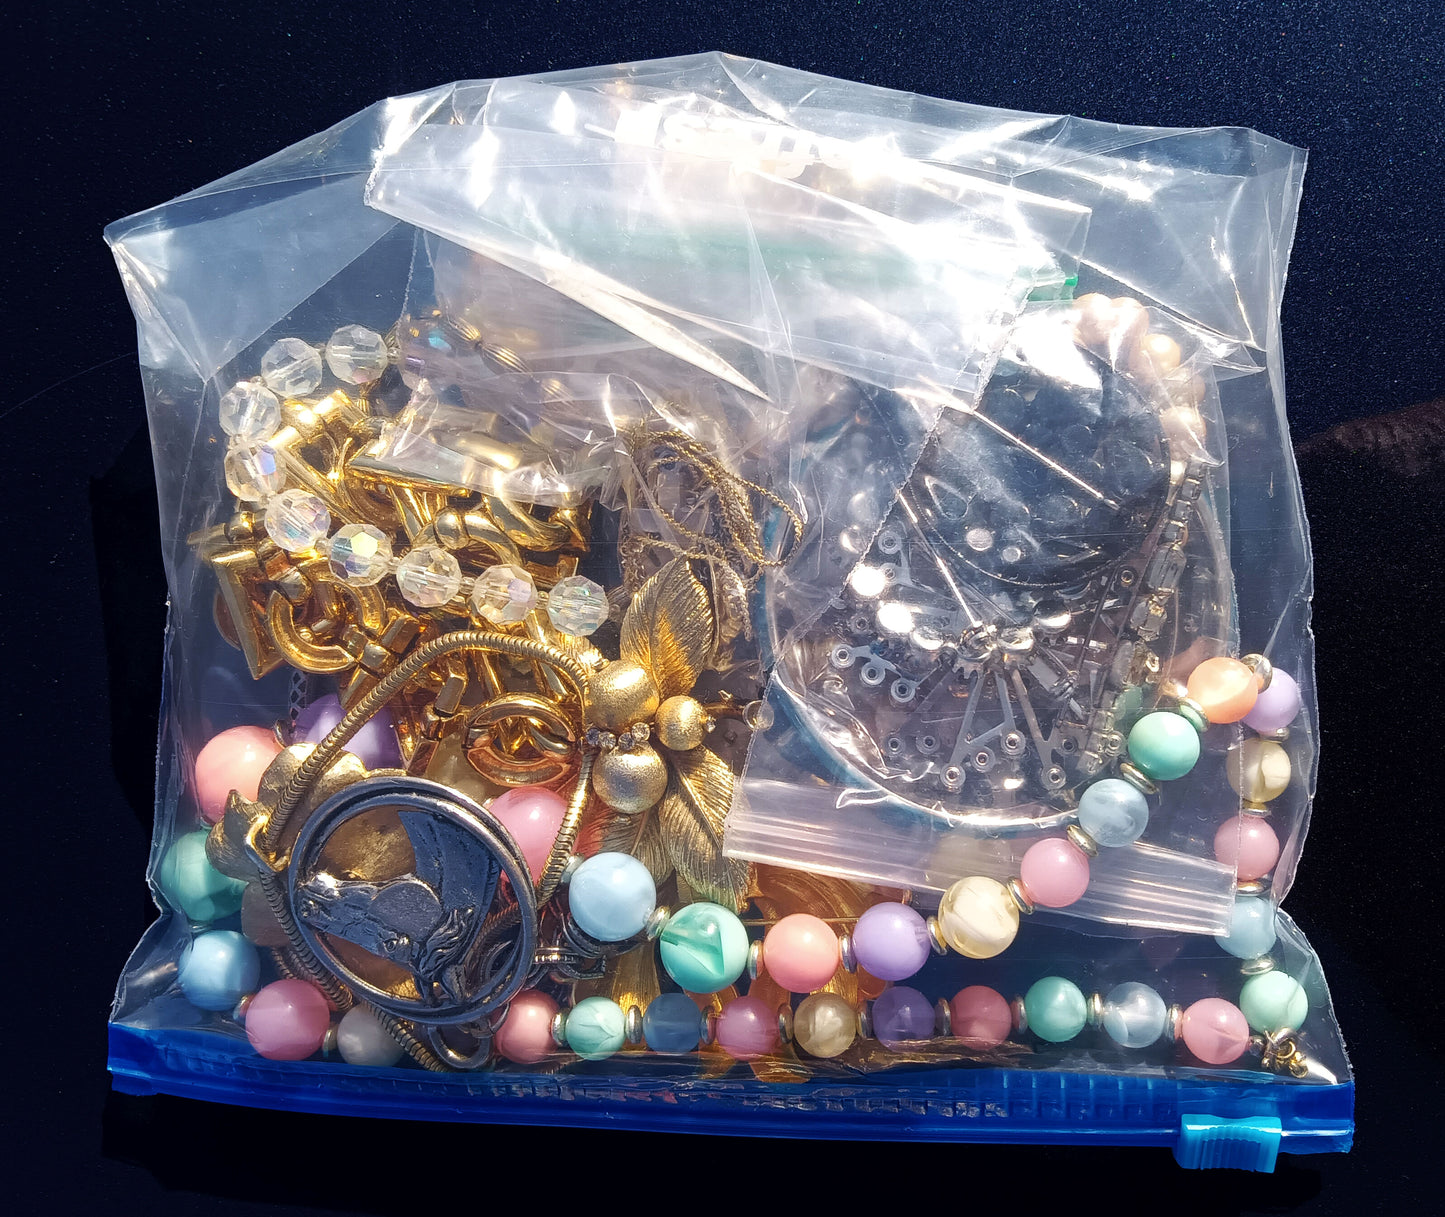 Vintage Costume Jewelry Mystery Bags – 1 pound